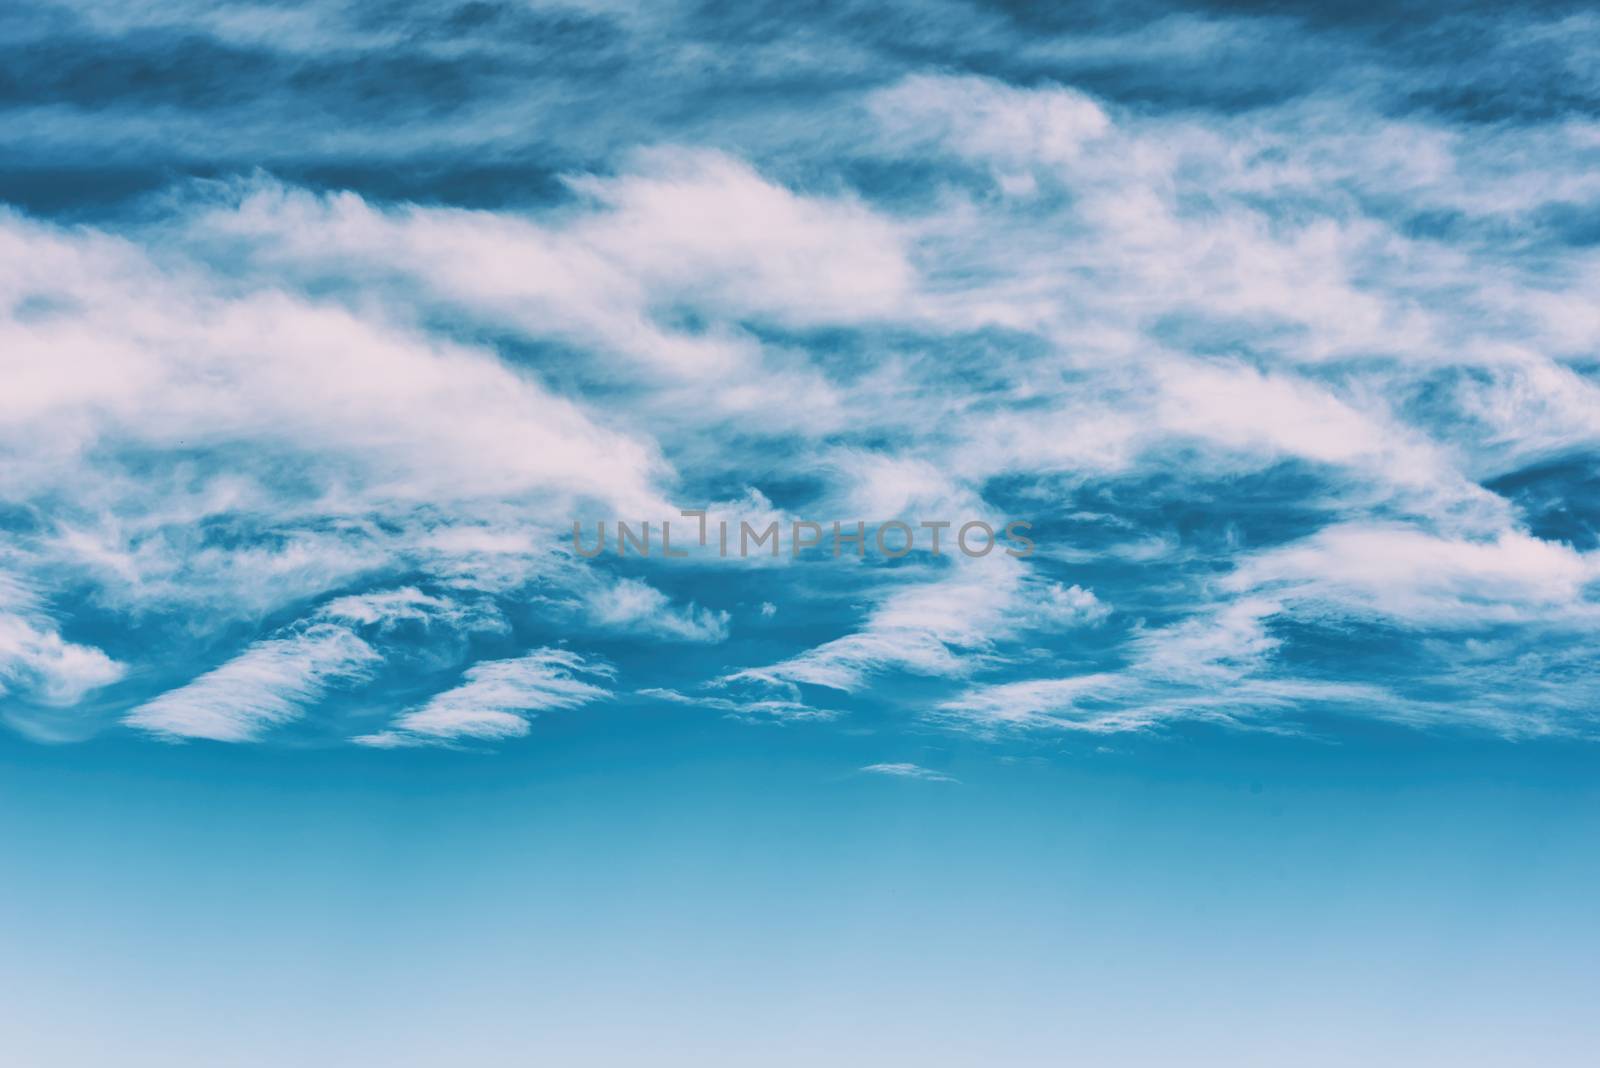 Clouds in the sky by Visual-Content